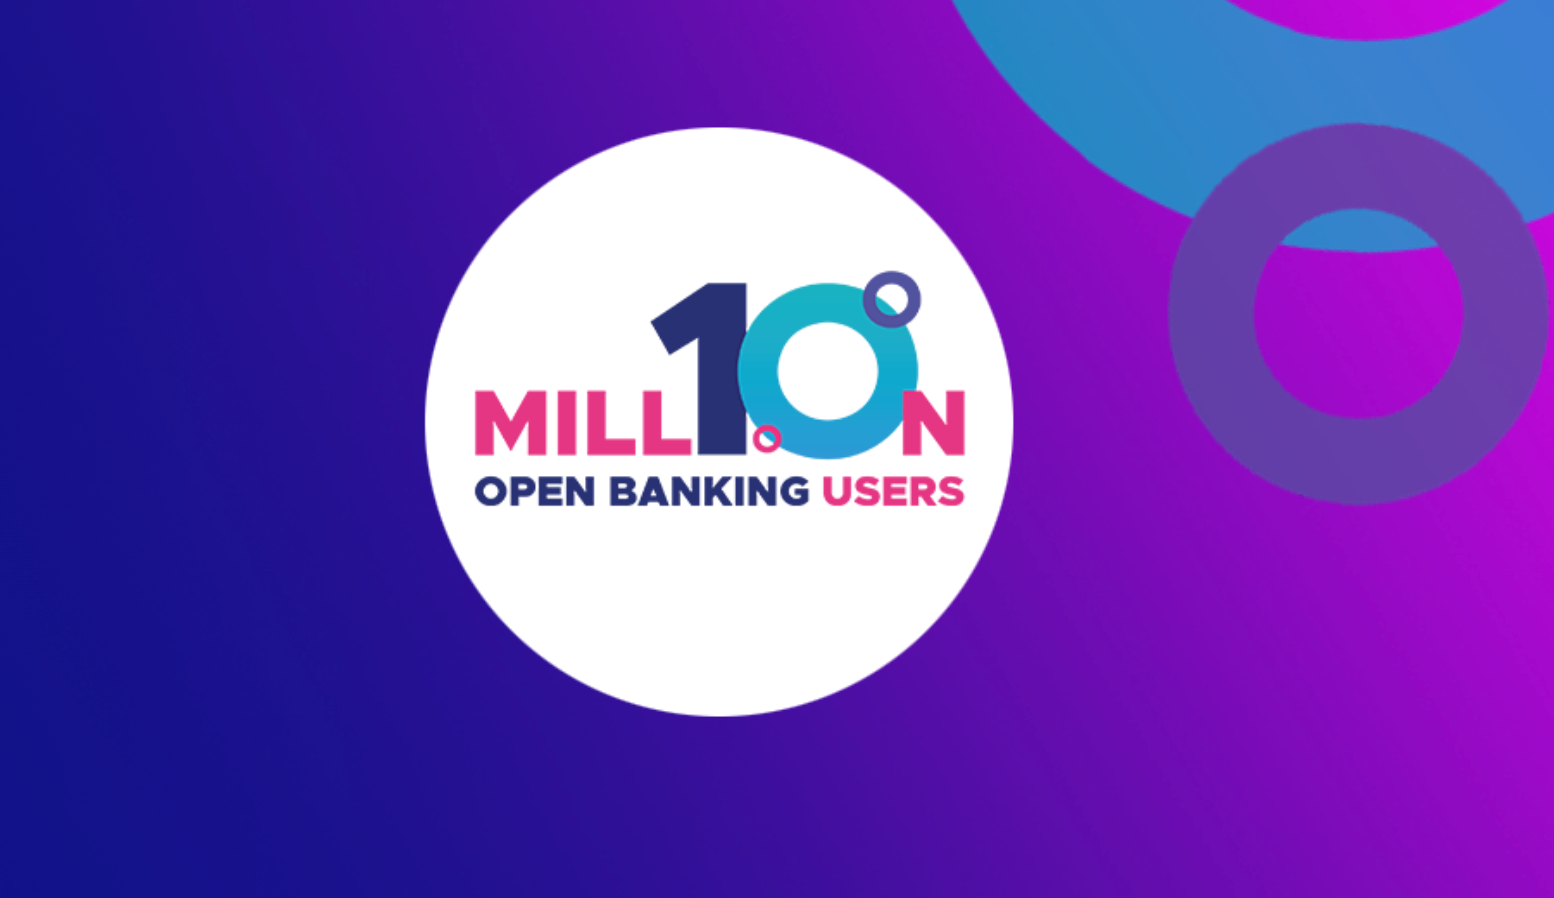 Join 10 million open banking users Image